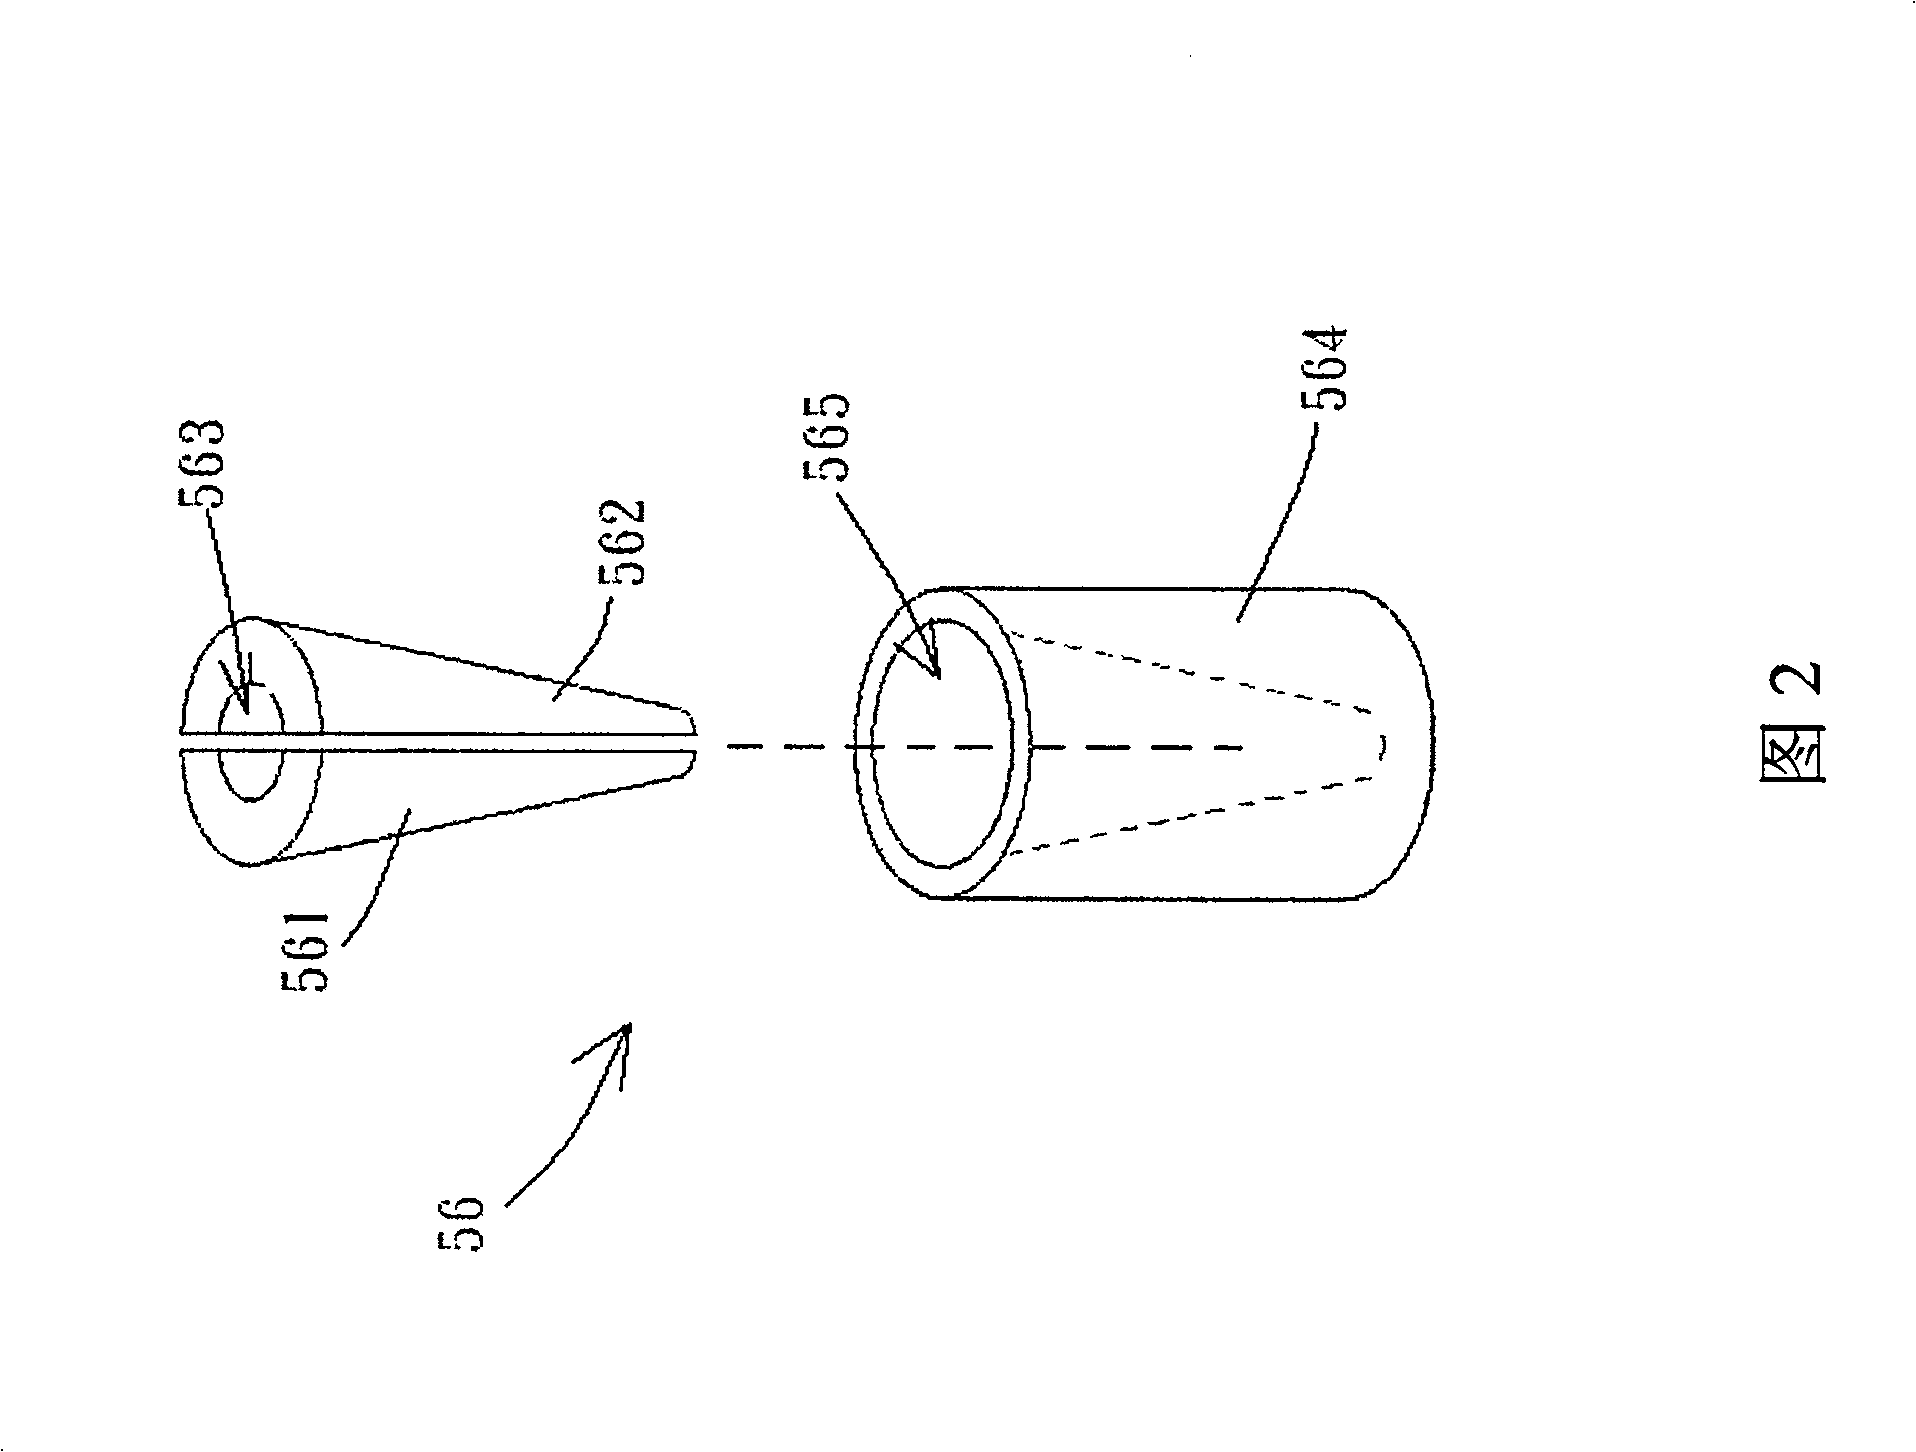 Method for fabricating precast products and forming appliance